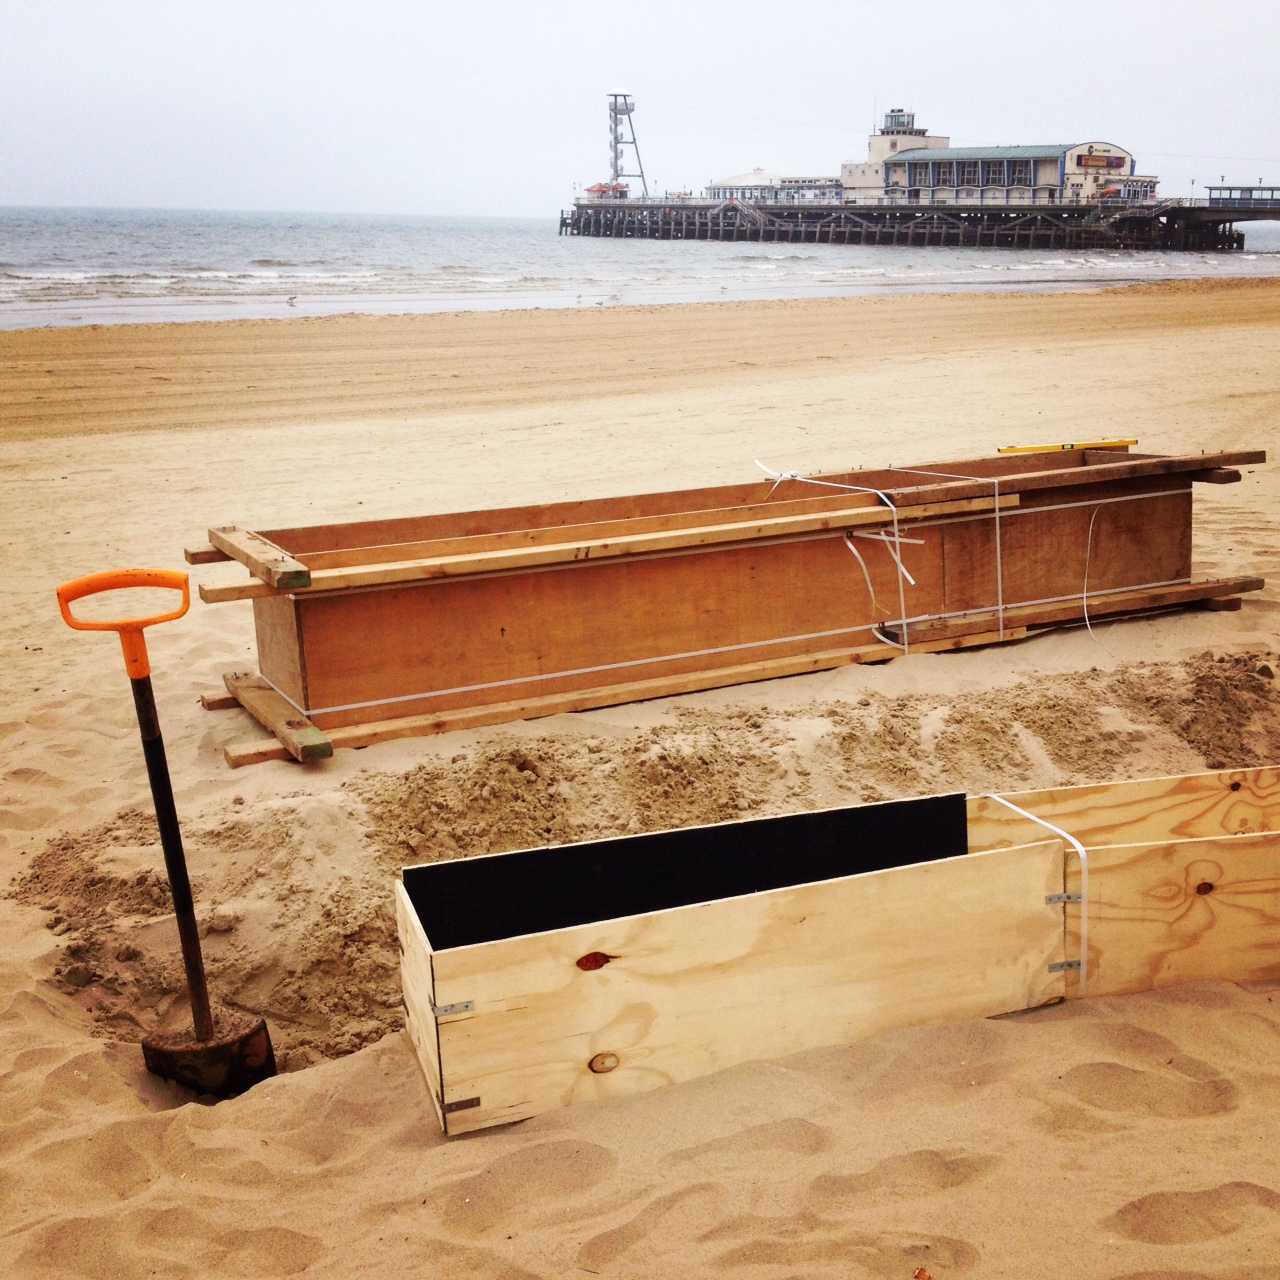 Compaction begins on the beach sand sculptures